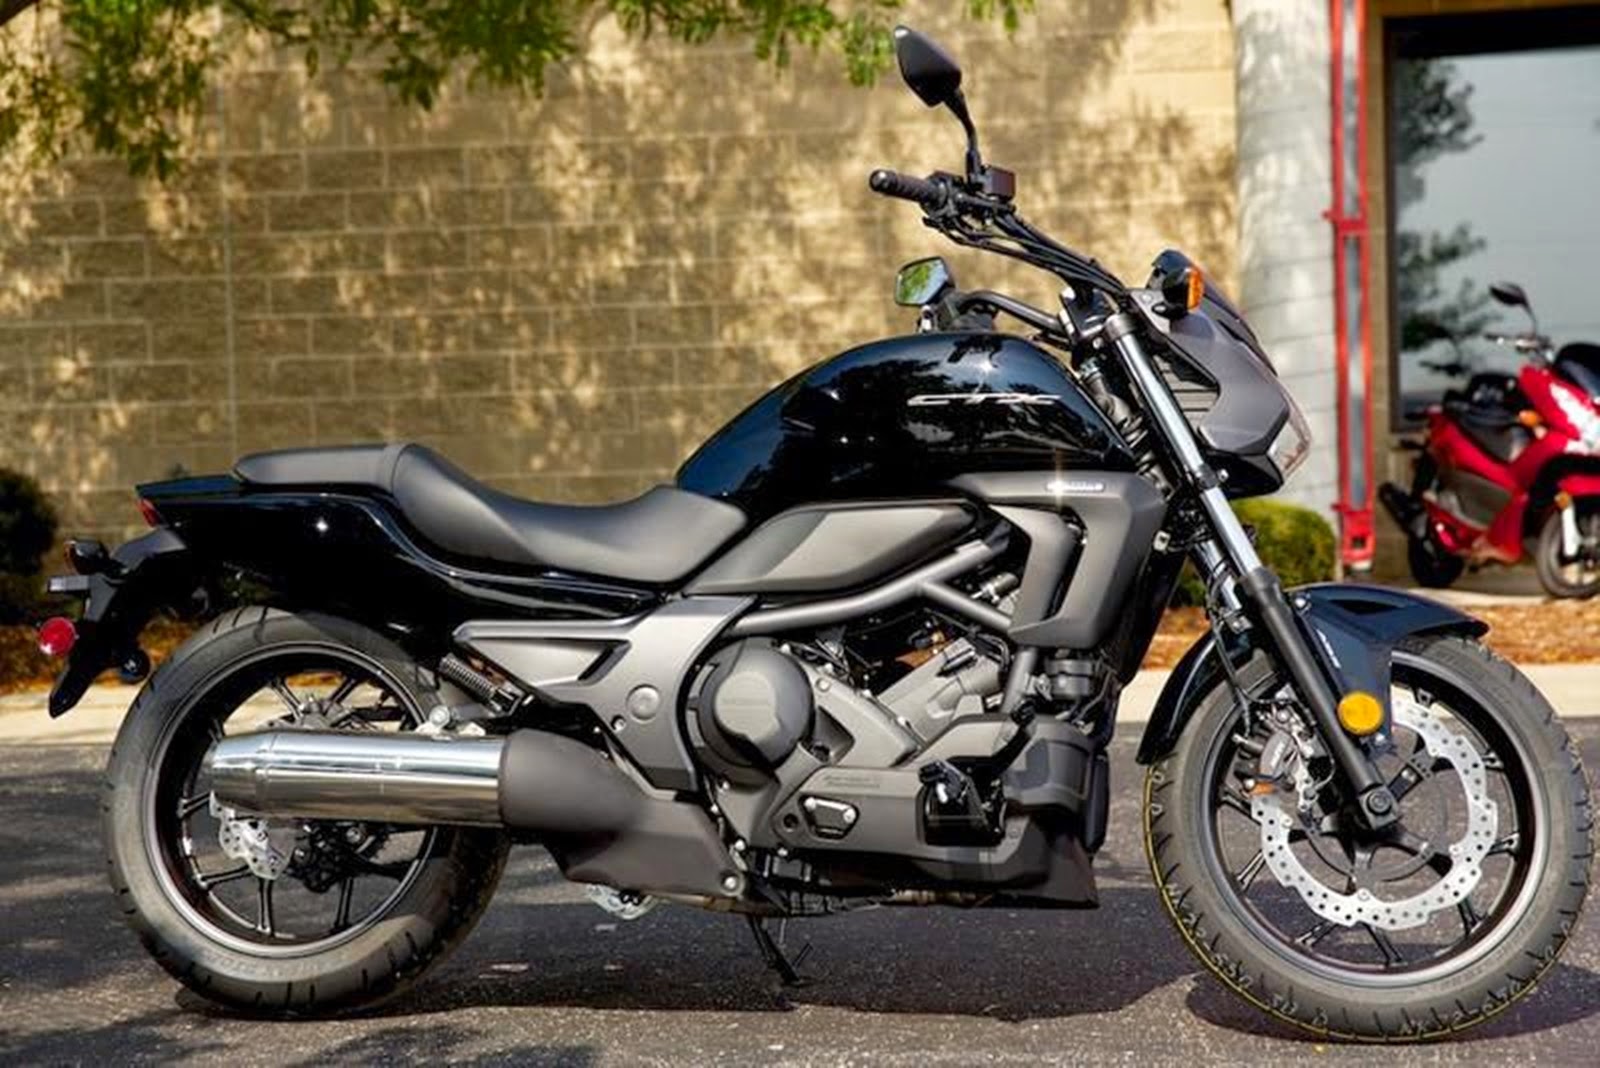 New Motorcycle: 2014 Honda Ctx700n DCT ABS Review and Specs